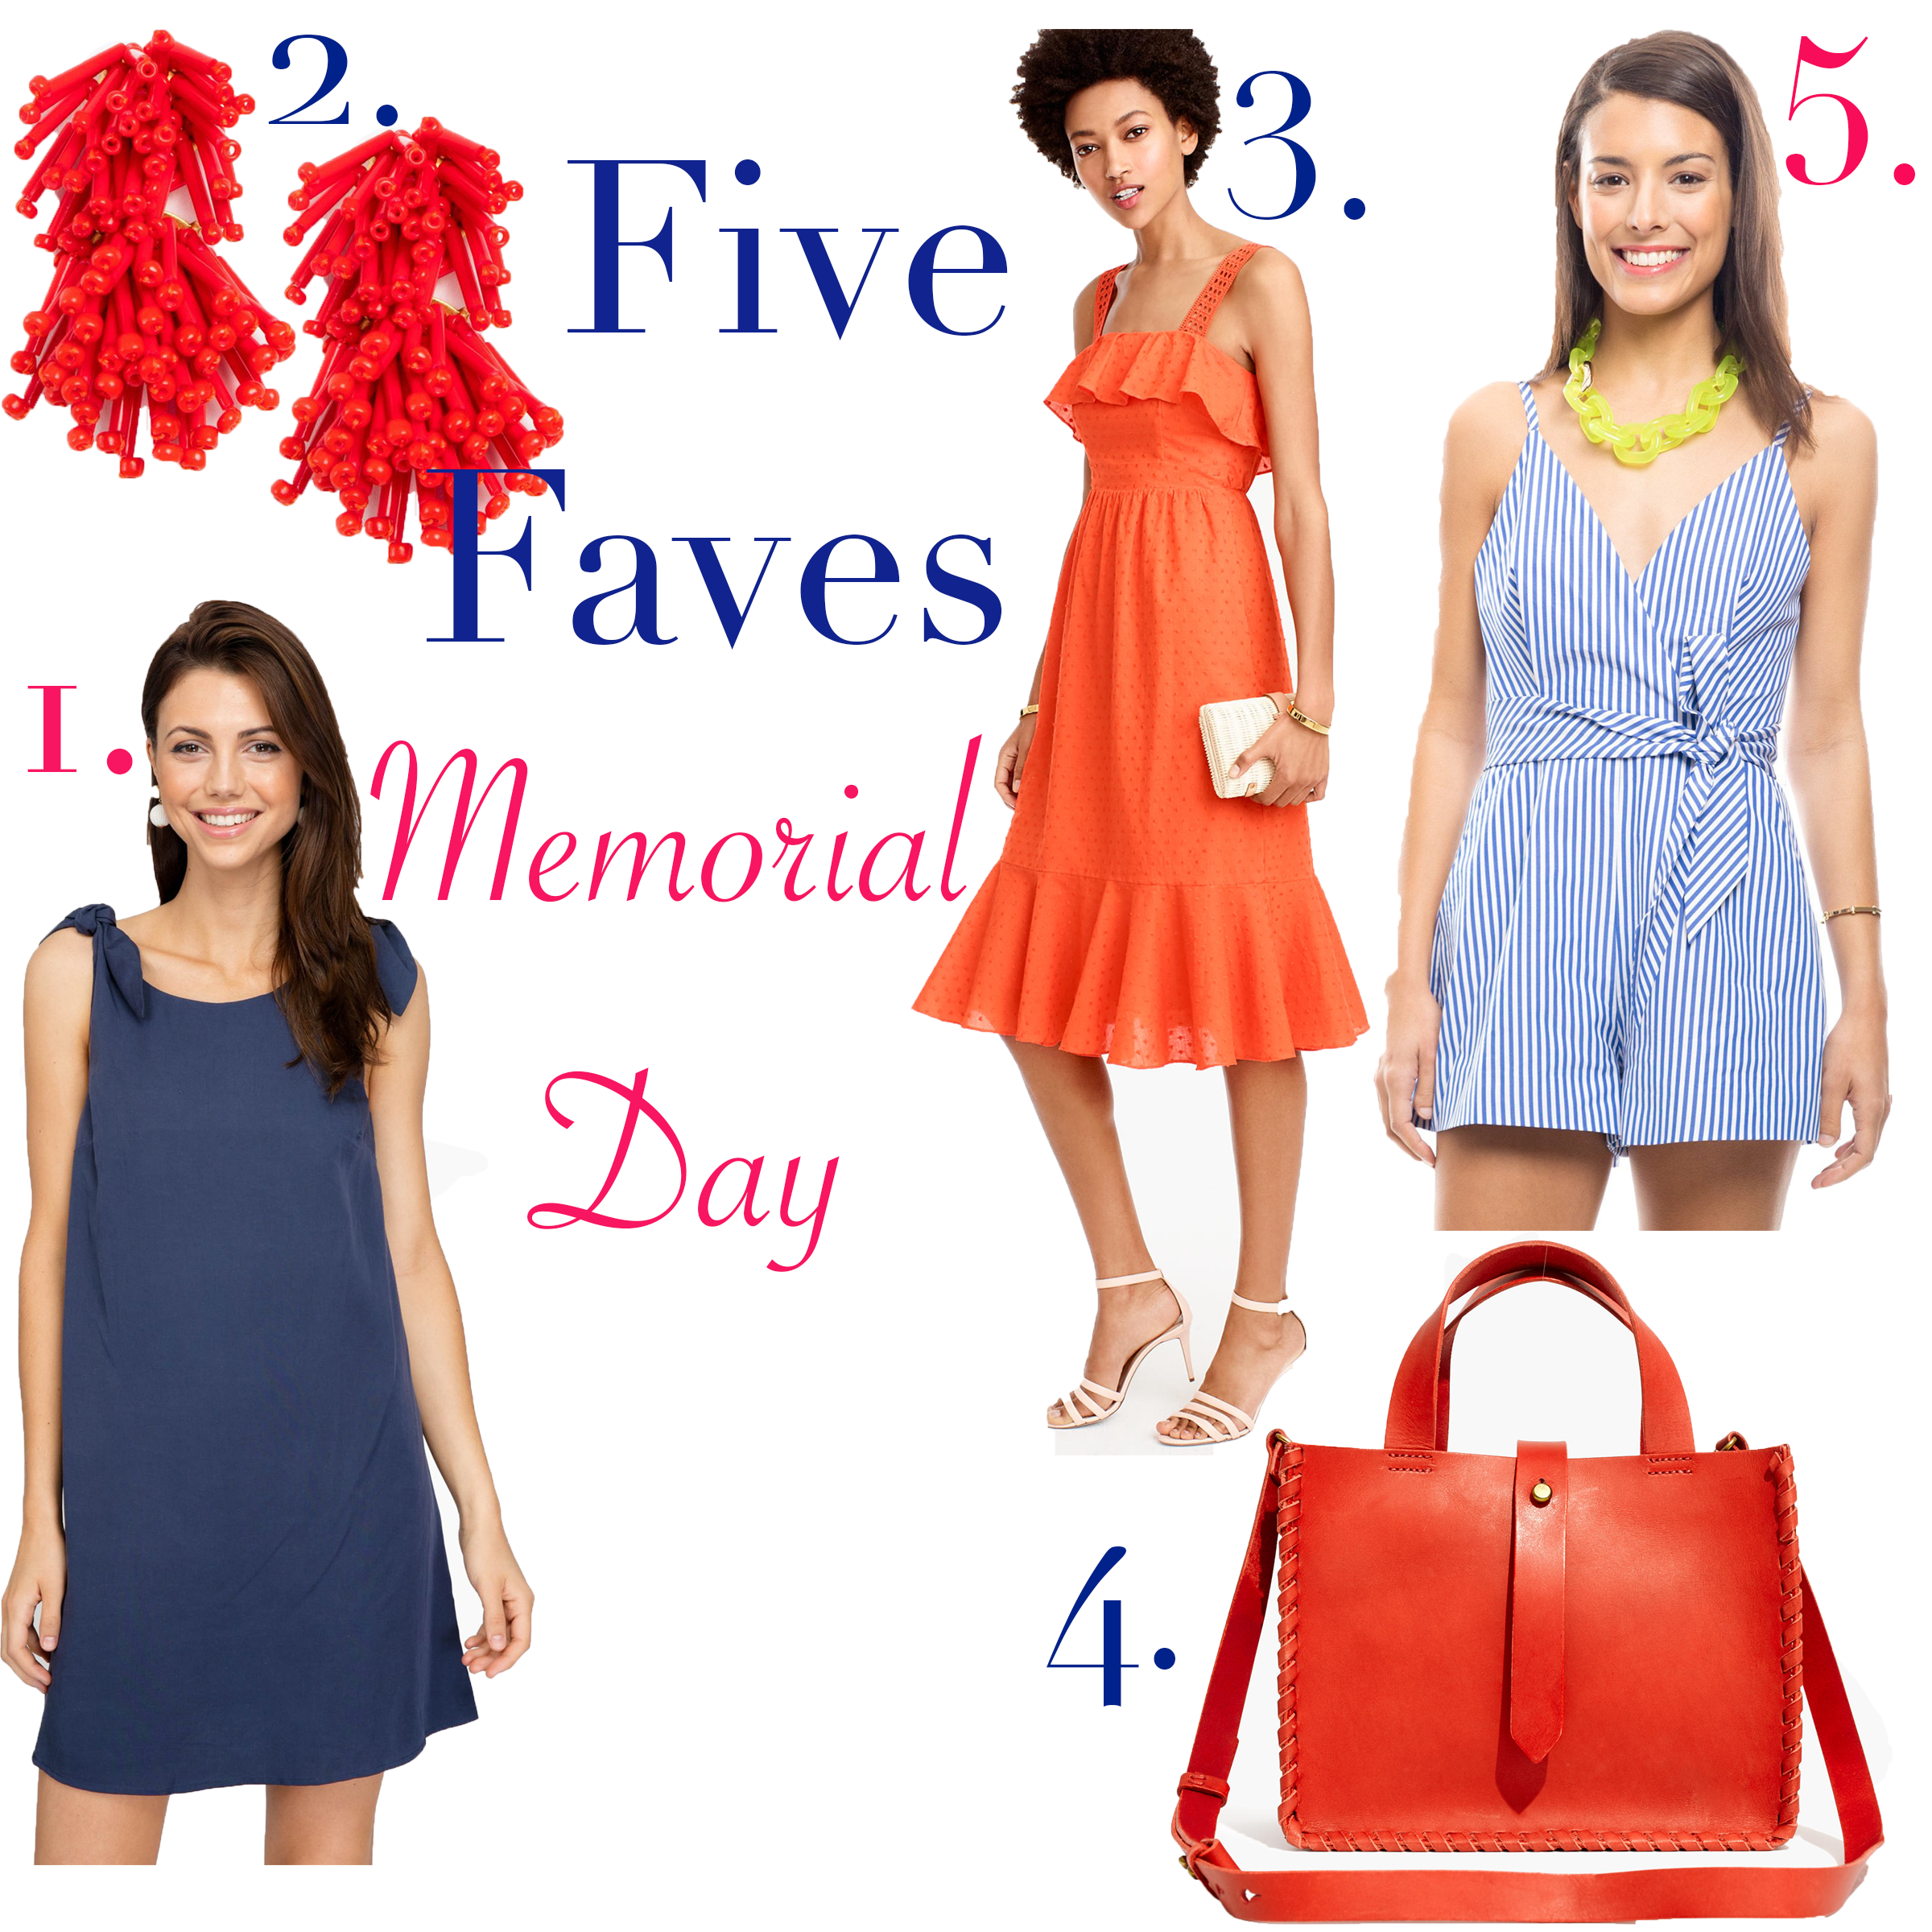 Five Faves~ Memorial Day!